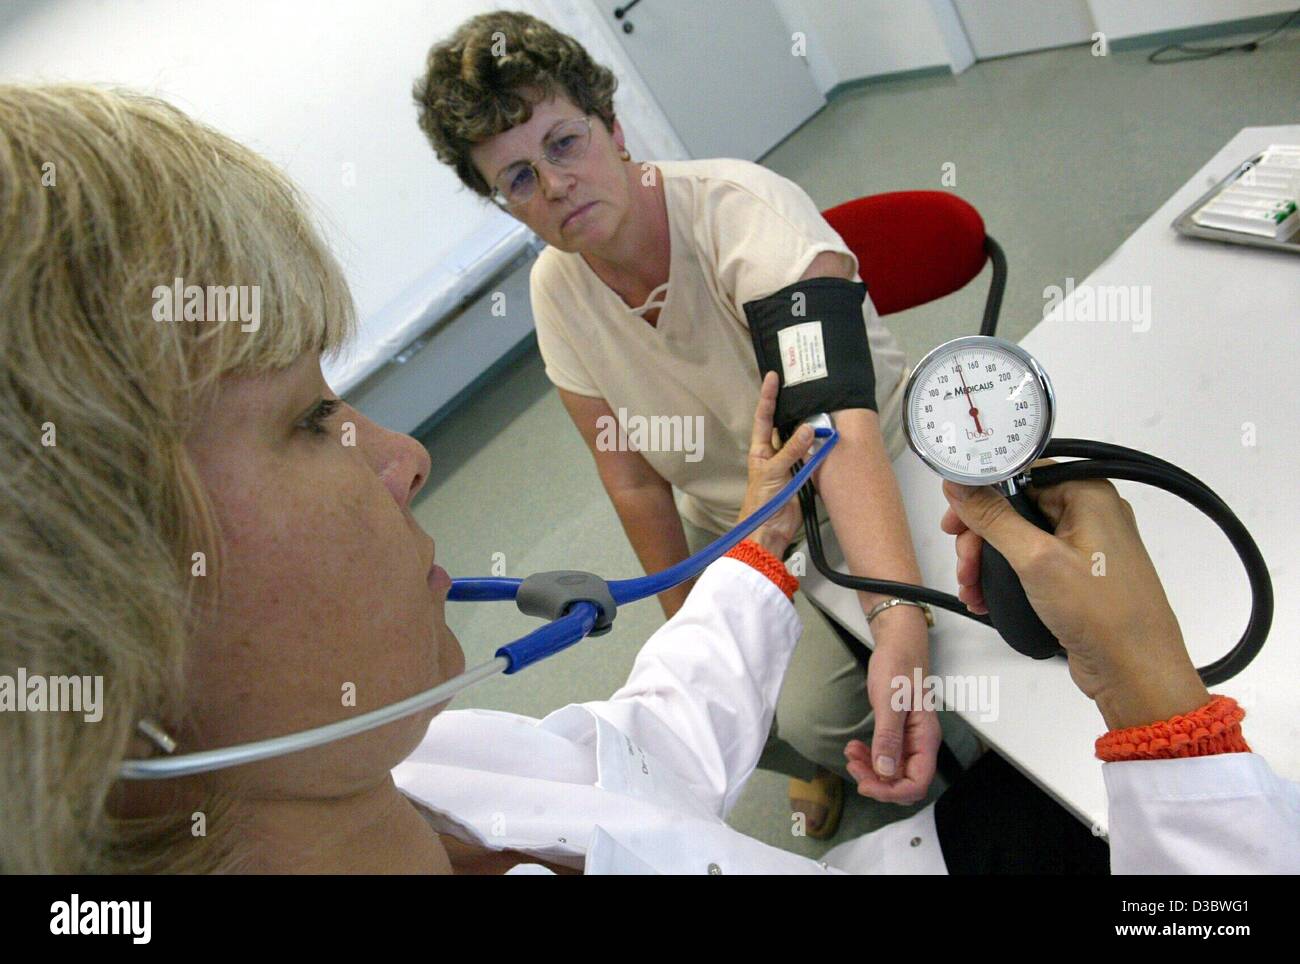 (dpa) - Doctor Birgit Dassow (L) takes the blood pressure of patient Ilona Fieber at a practice in Magdeburg, Germany, 21 August 2003. The envisaged healthcare reform of the German government will result in deep cuts in the health and welfare systems. Germany's expensive healthcare system which is f Stock Photo